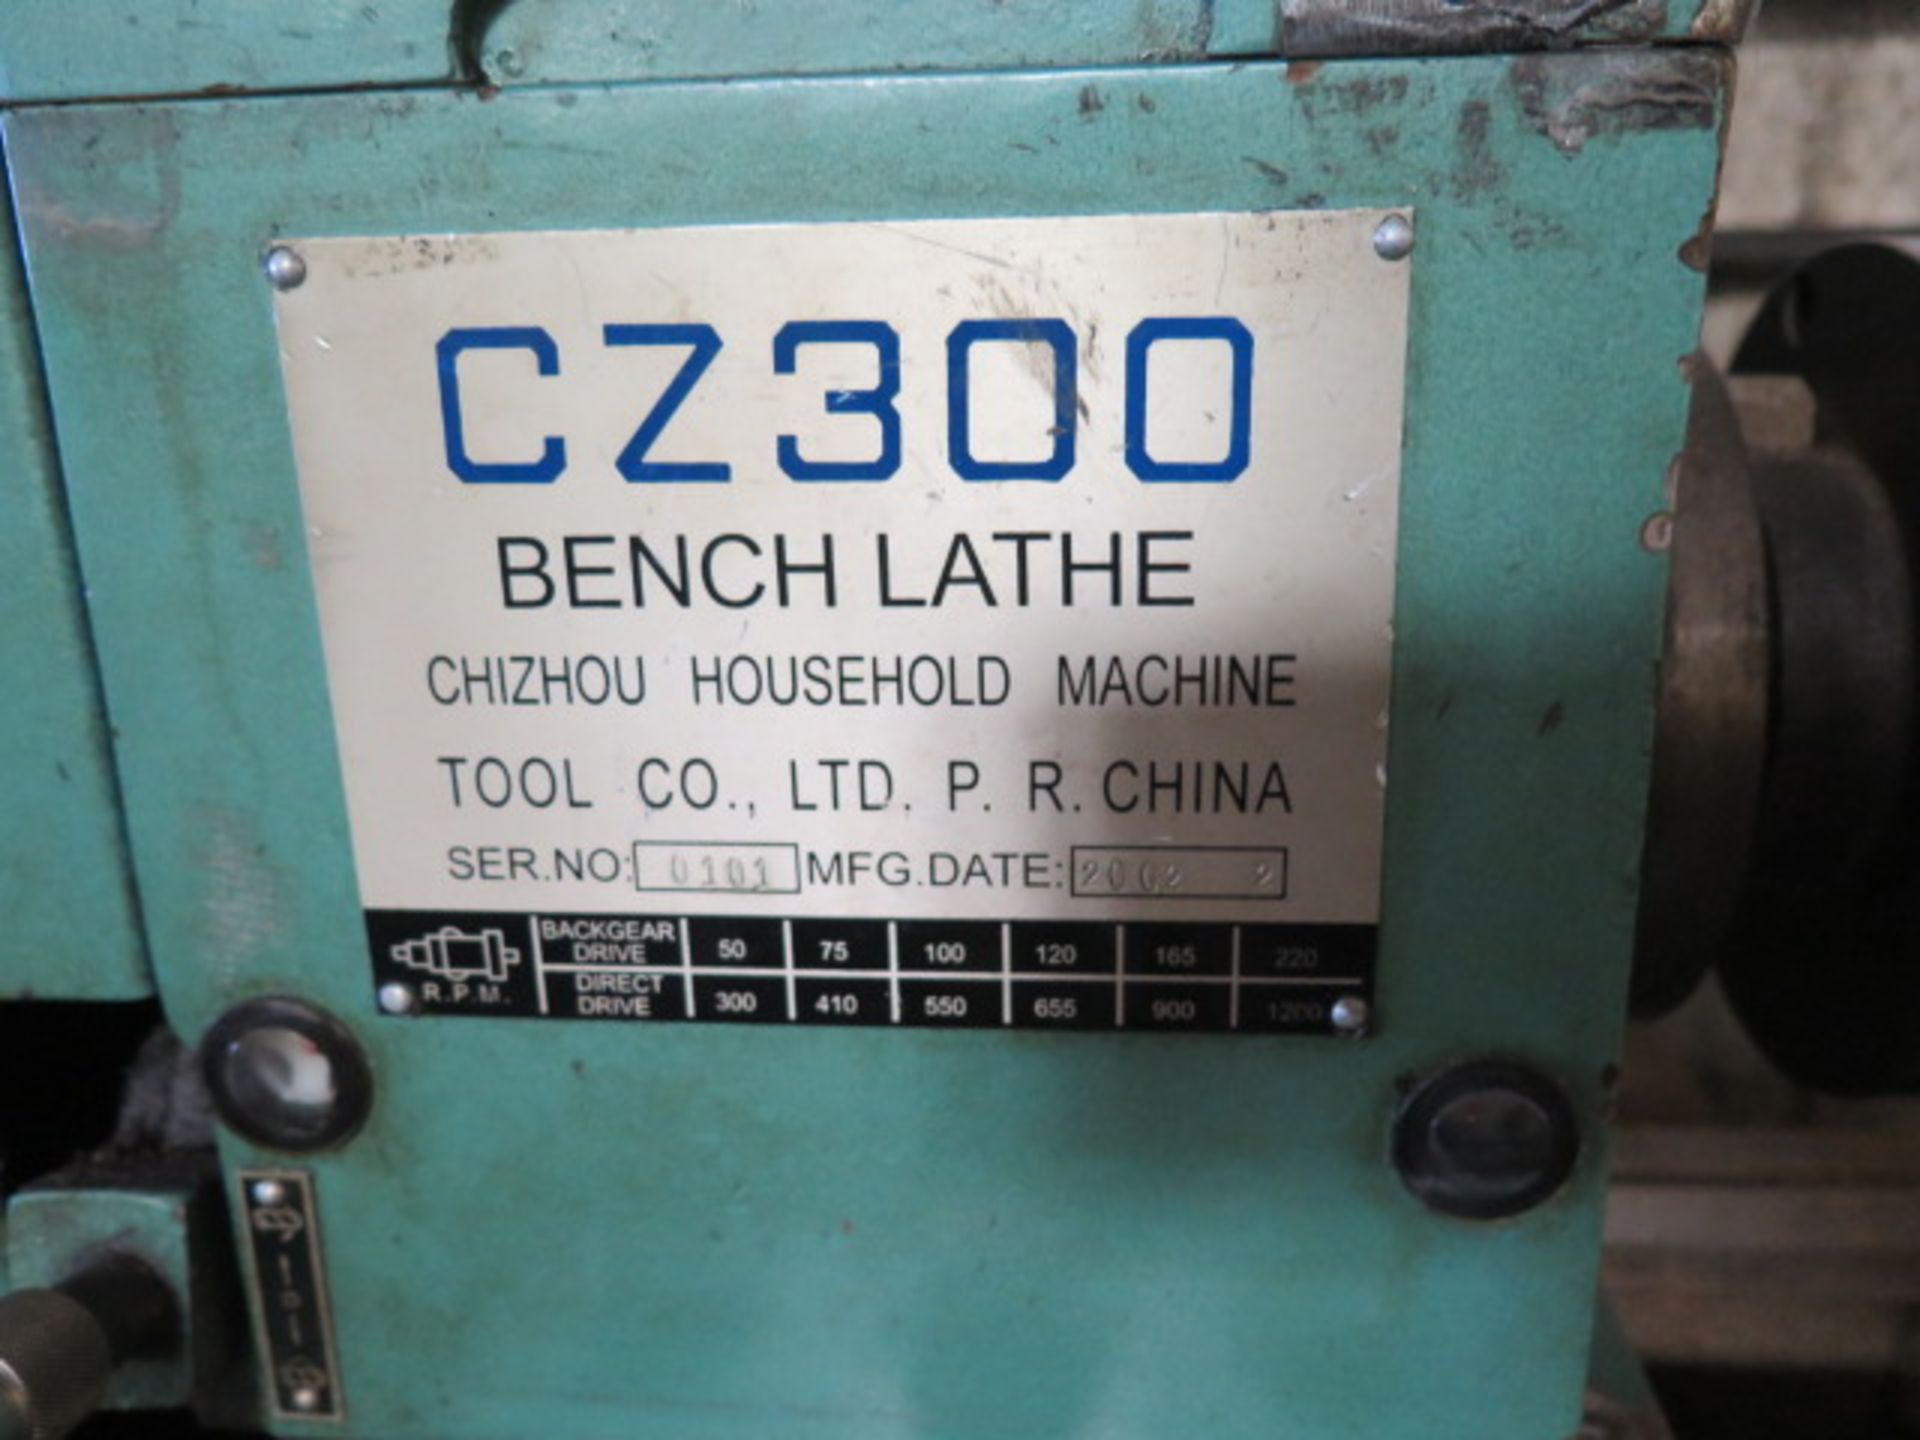 Chizhou mdl. CZ300 11 ½” x 24” Lathe s/n 0101 w/ 50-1200 RPM, Inch/mm Thread, Tailstock, SOLD AS IS - Image 3 of 12